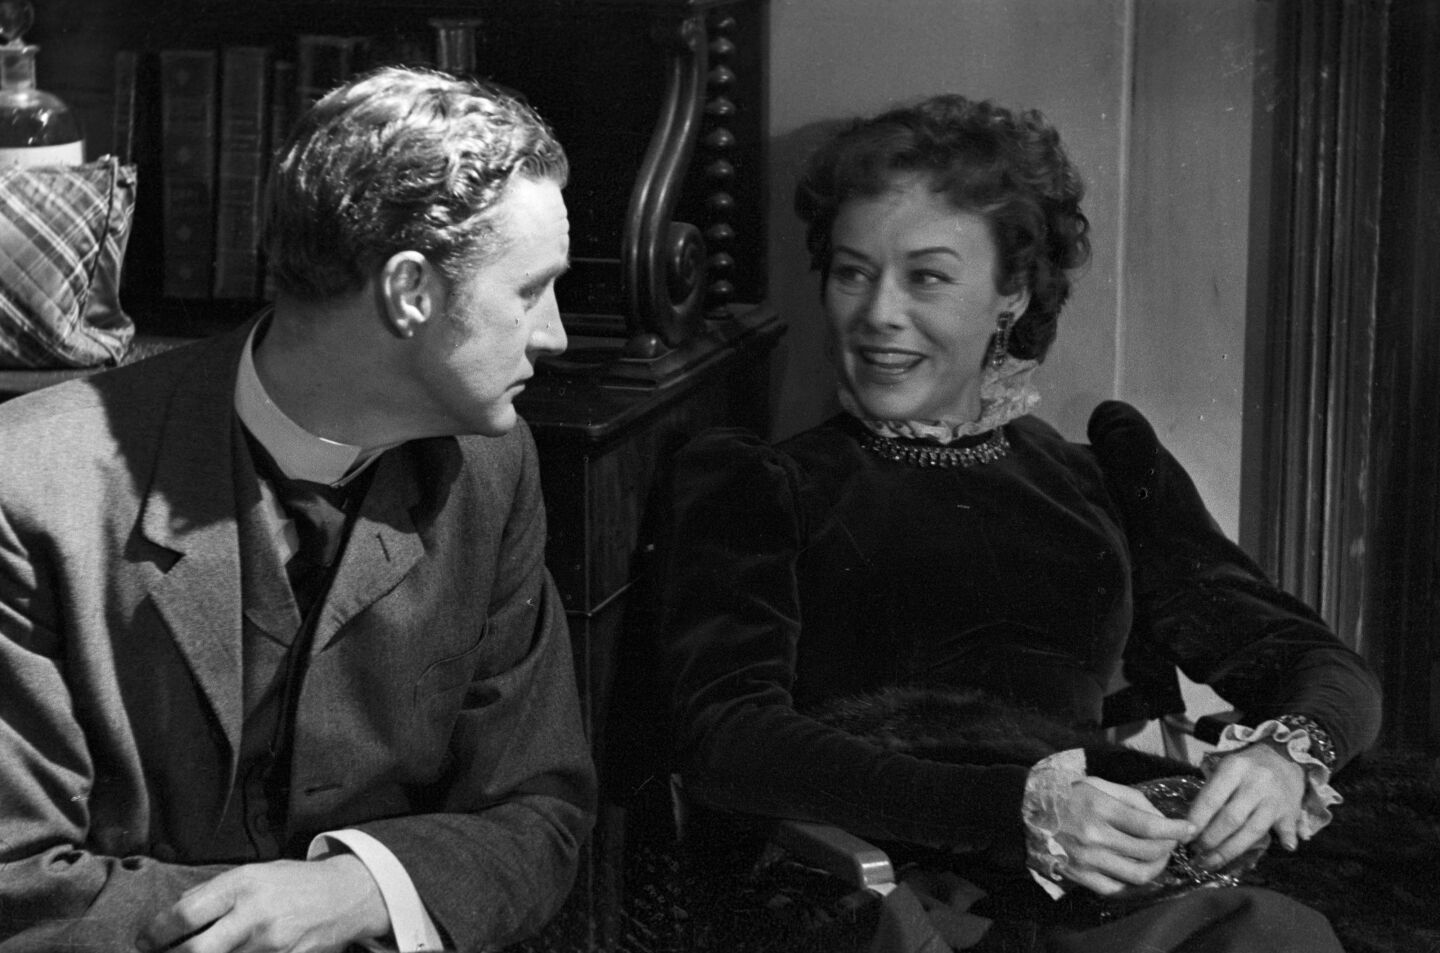 Ronald Howard and Paulette Goddard in a 1954 episode of the "Sherlock Holmes" TV series.